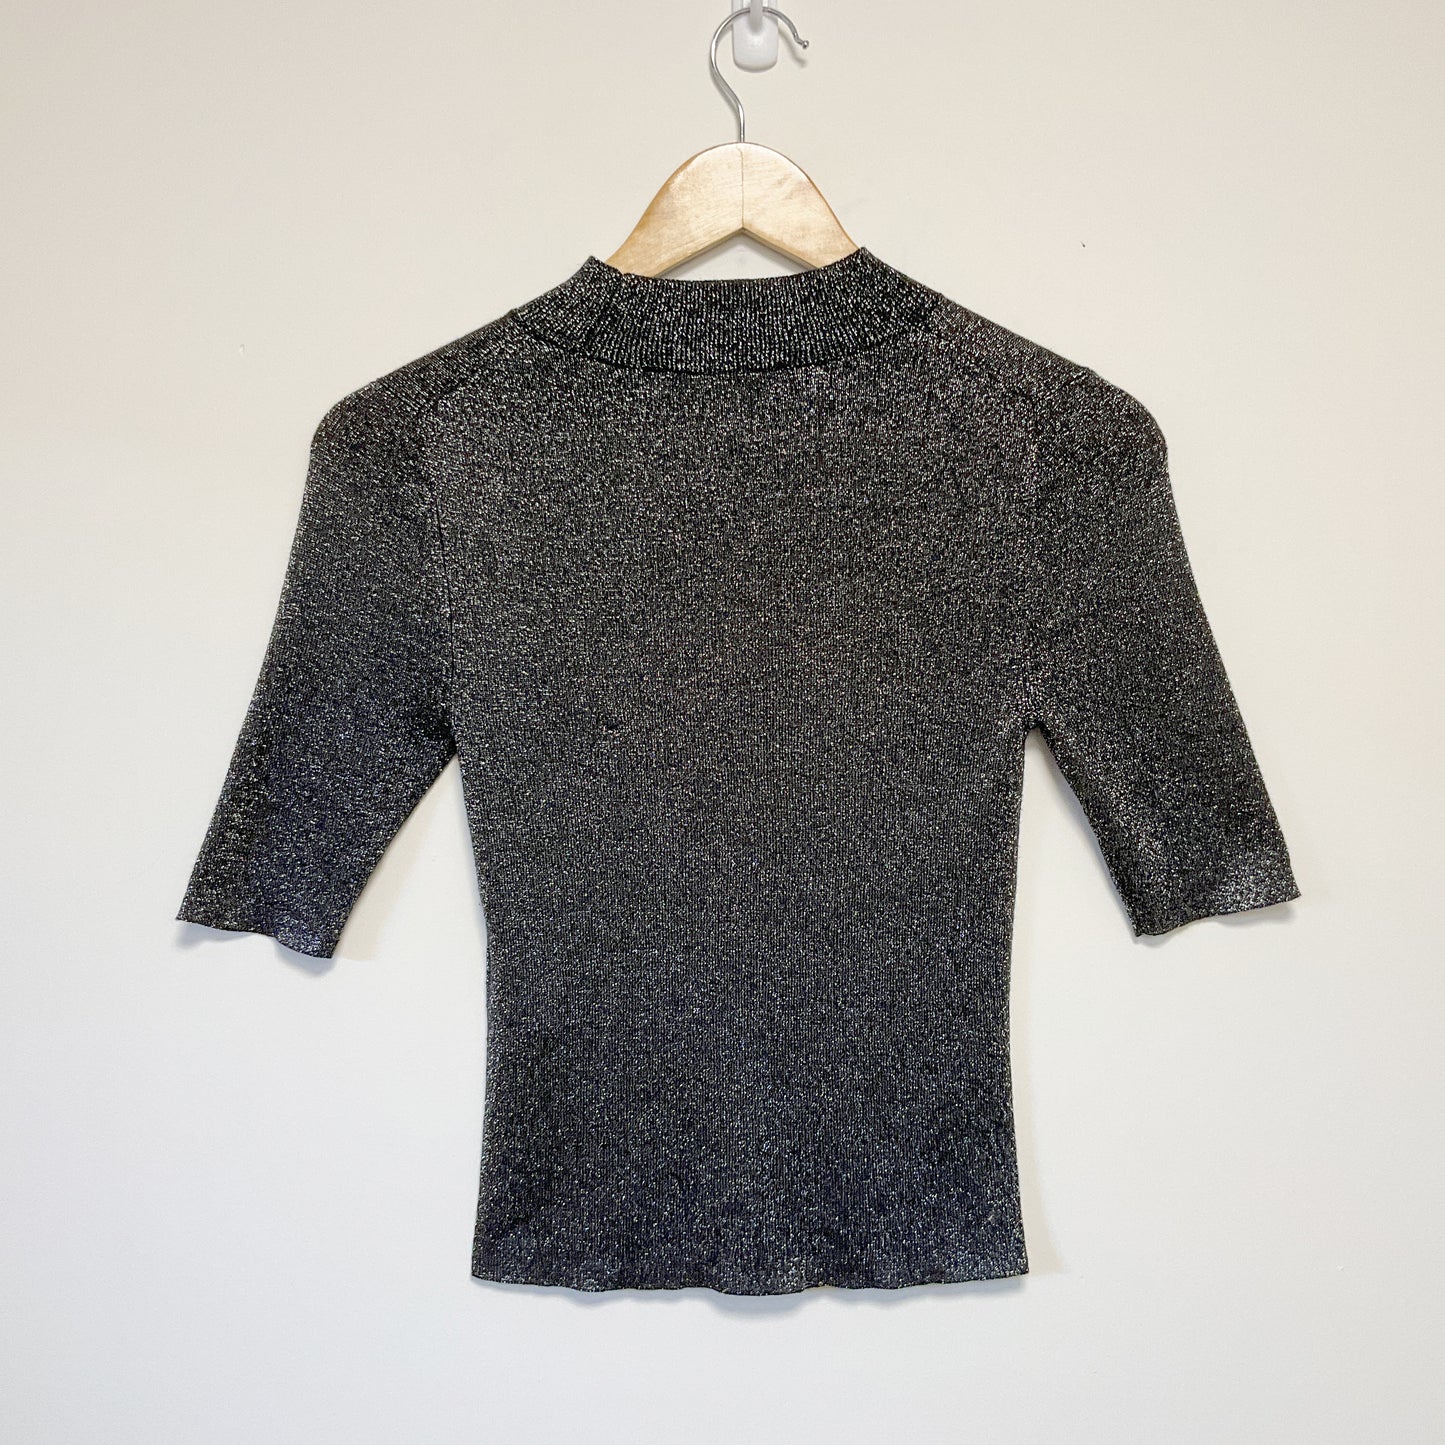 Forever New - Black Sparkly Knitted Top